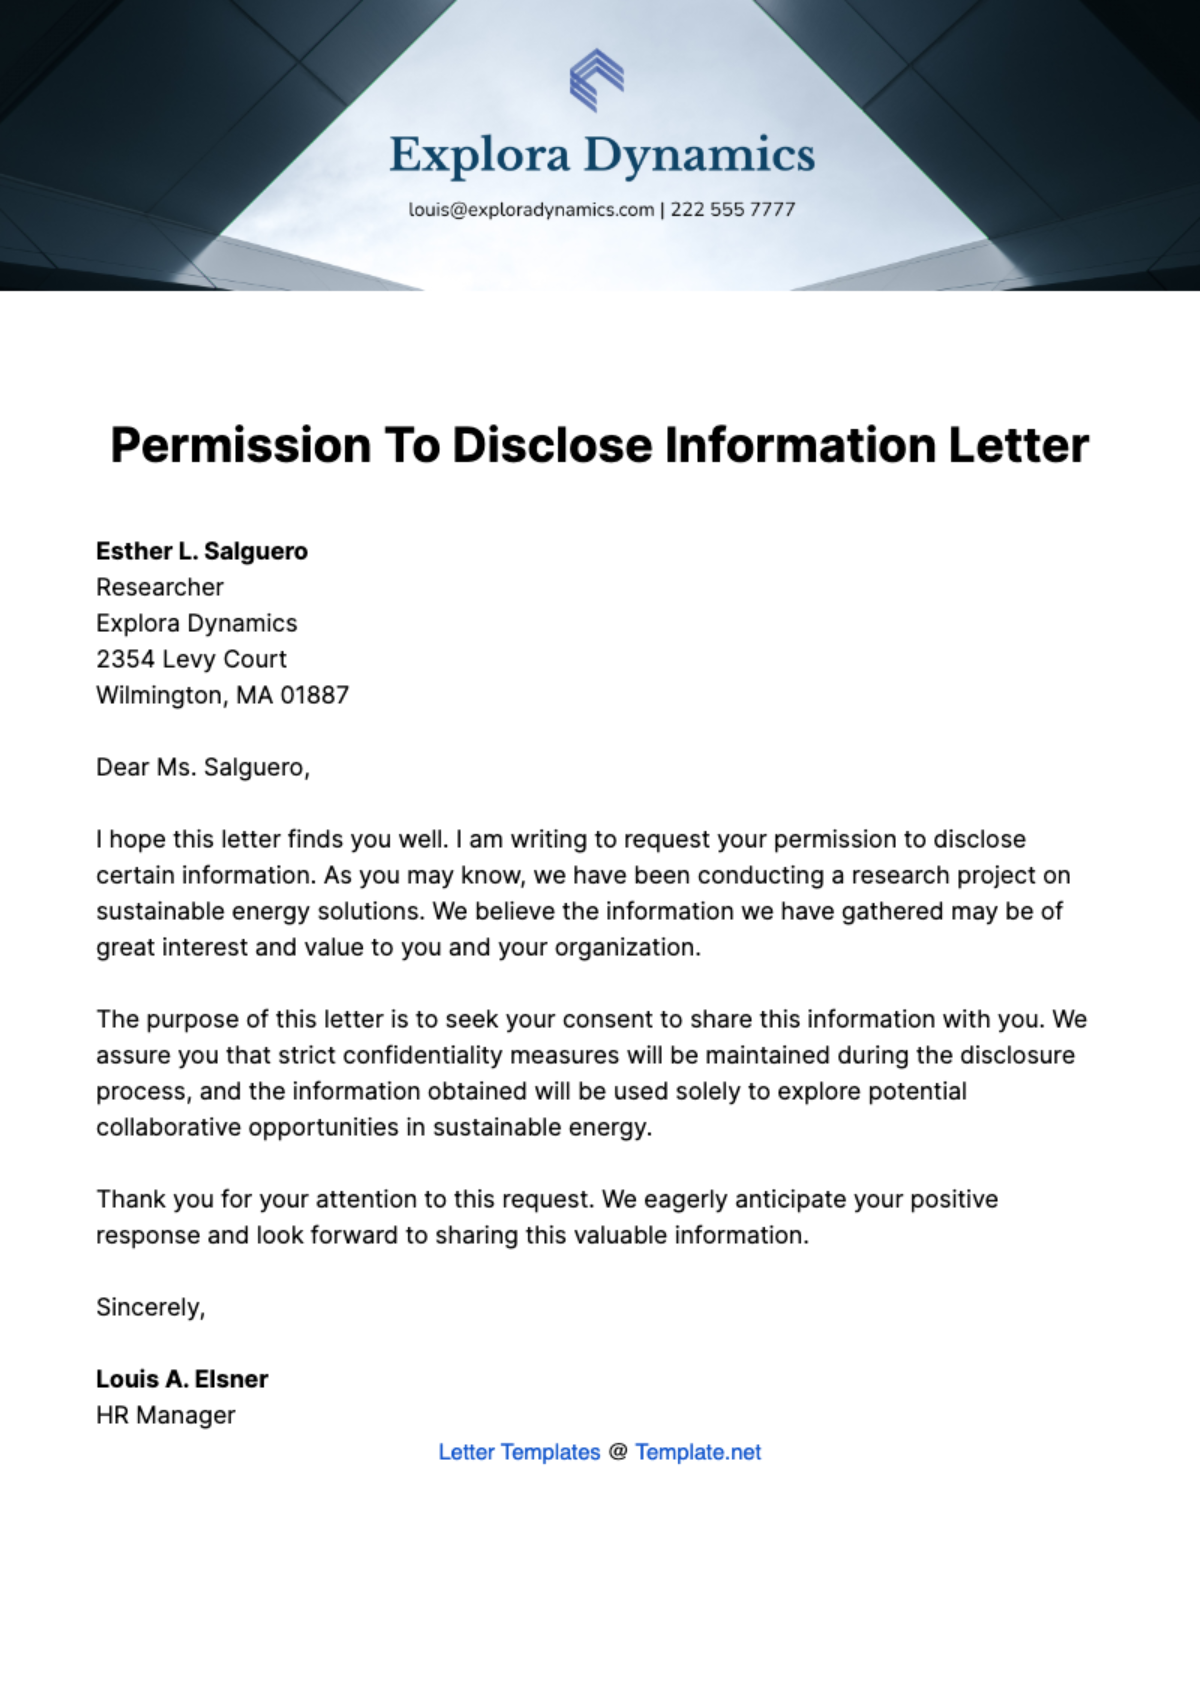 Free Permission to Disclose Information Letter Template